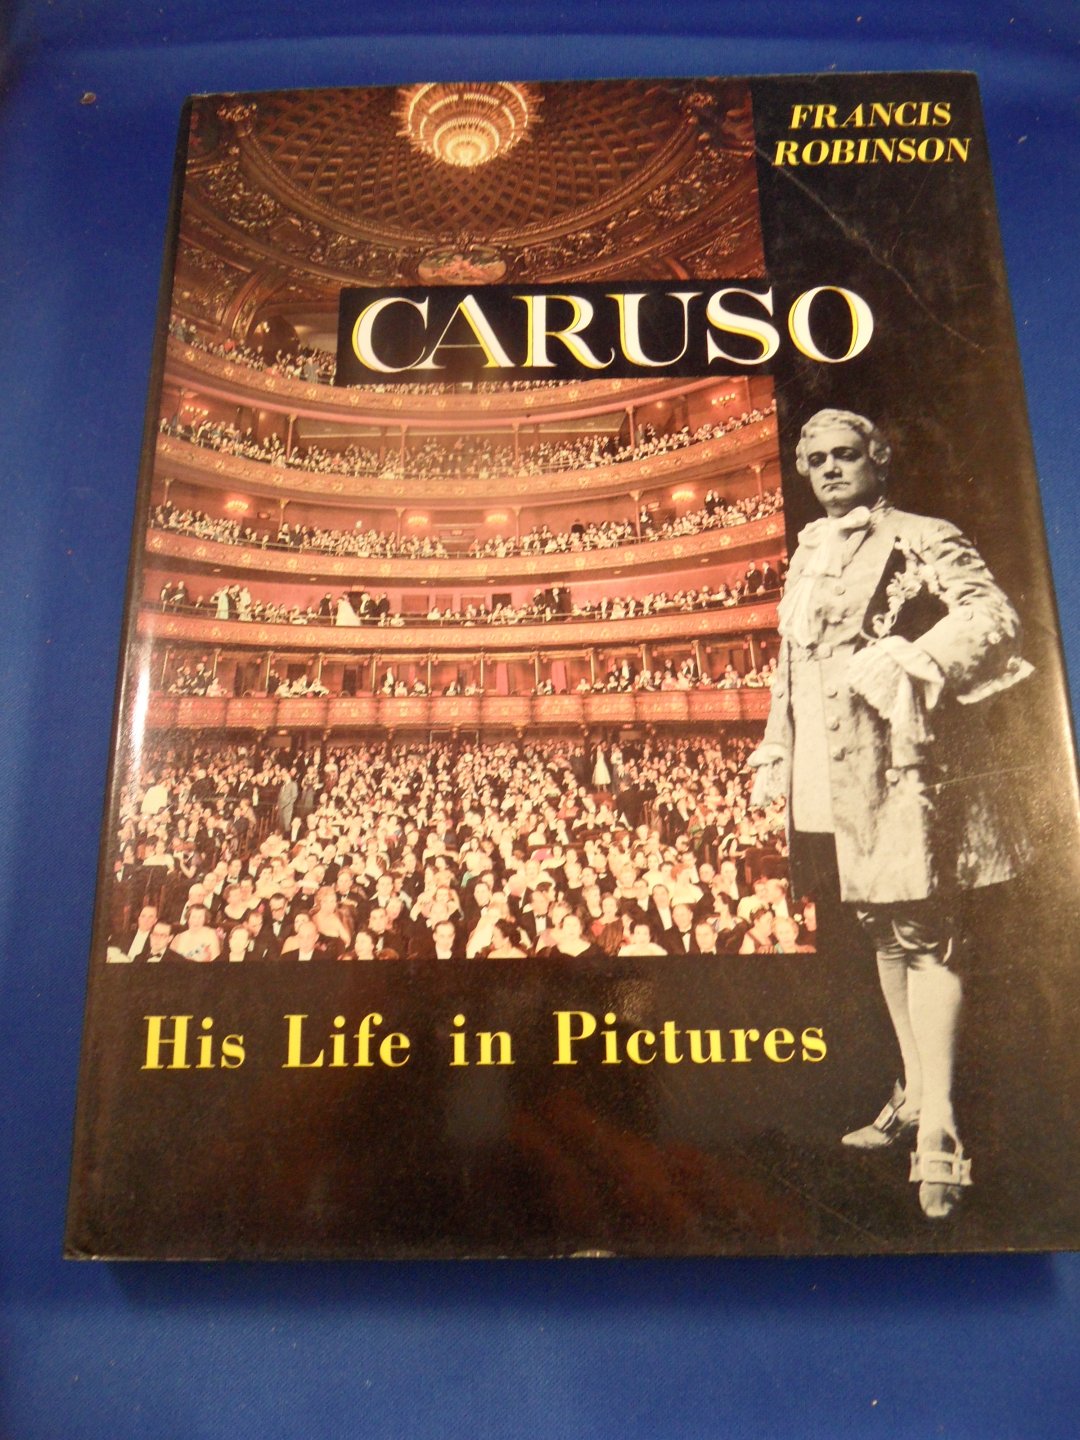 Robinson, Francis - Caruso, his life in pictures